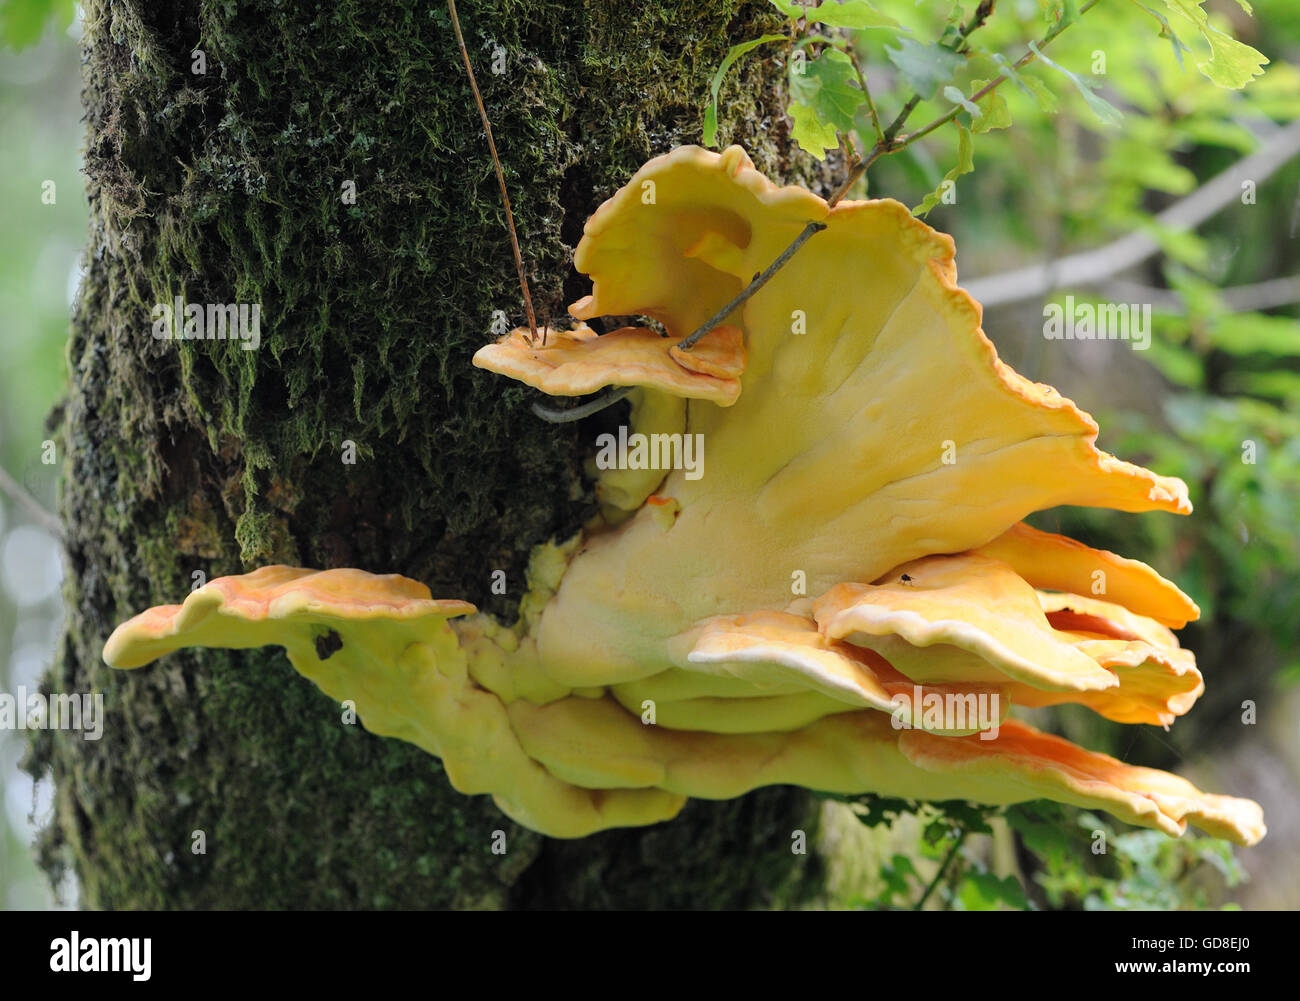 Sulphur shelf or chicken of the woods fungus (Laetiporus sulphureus) growing on the mossy trunk of an oak tree above Derwent Water Stock Photo